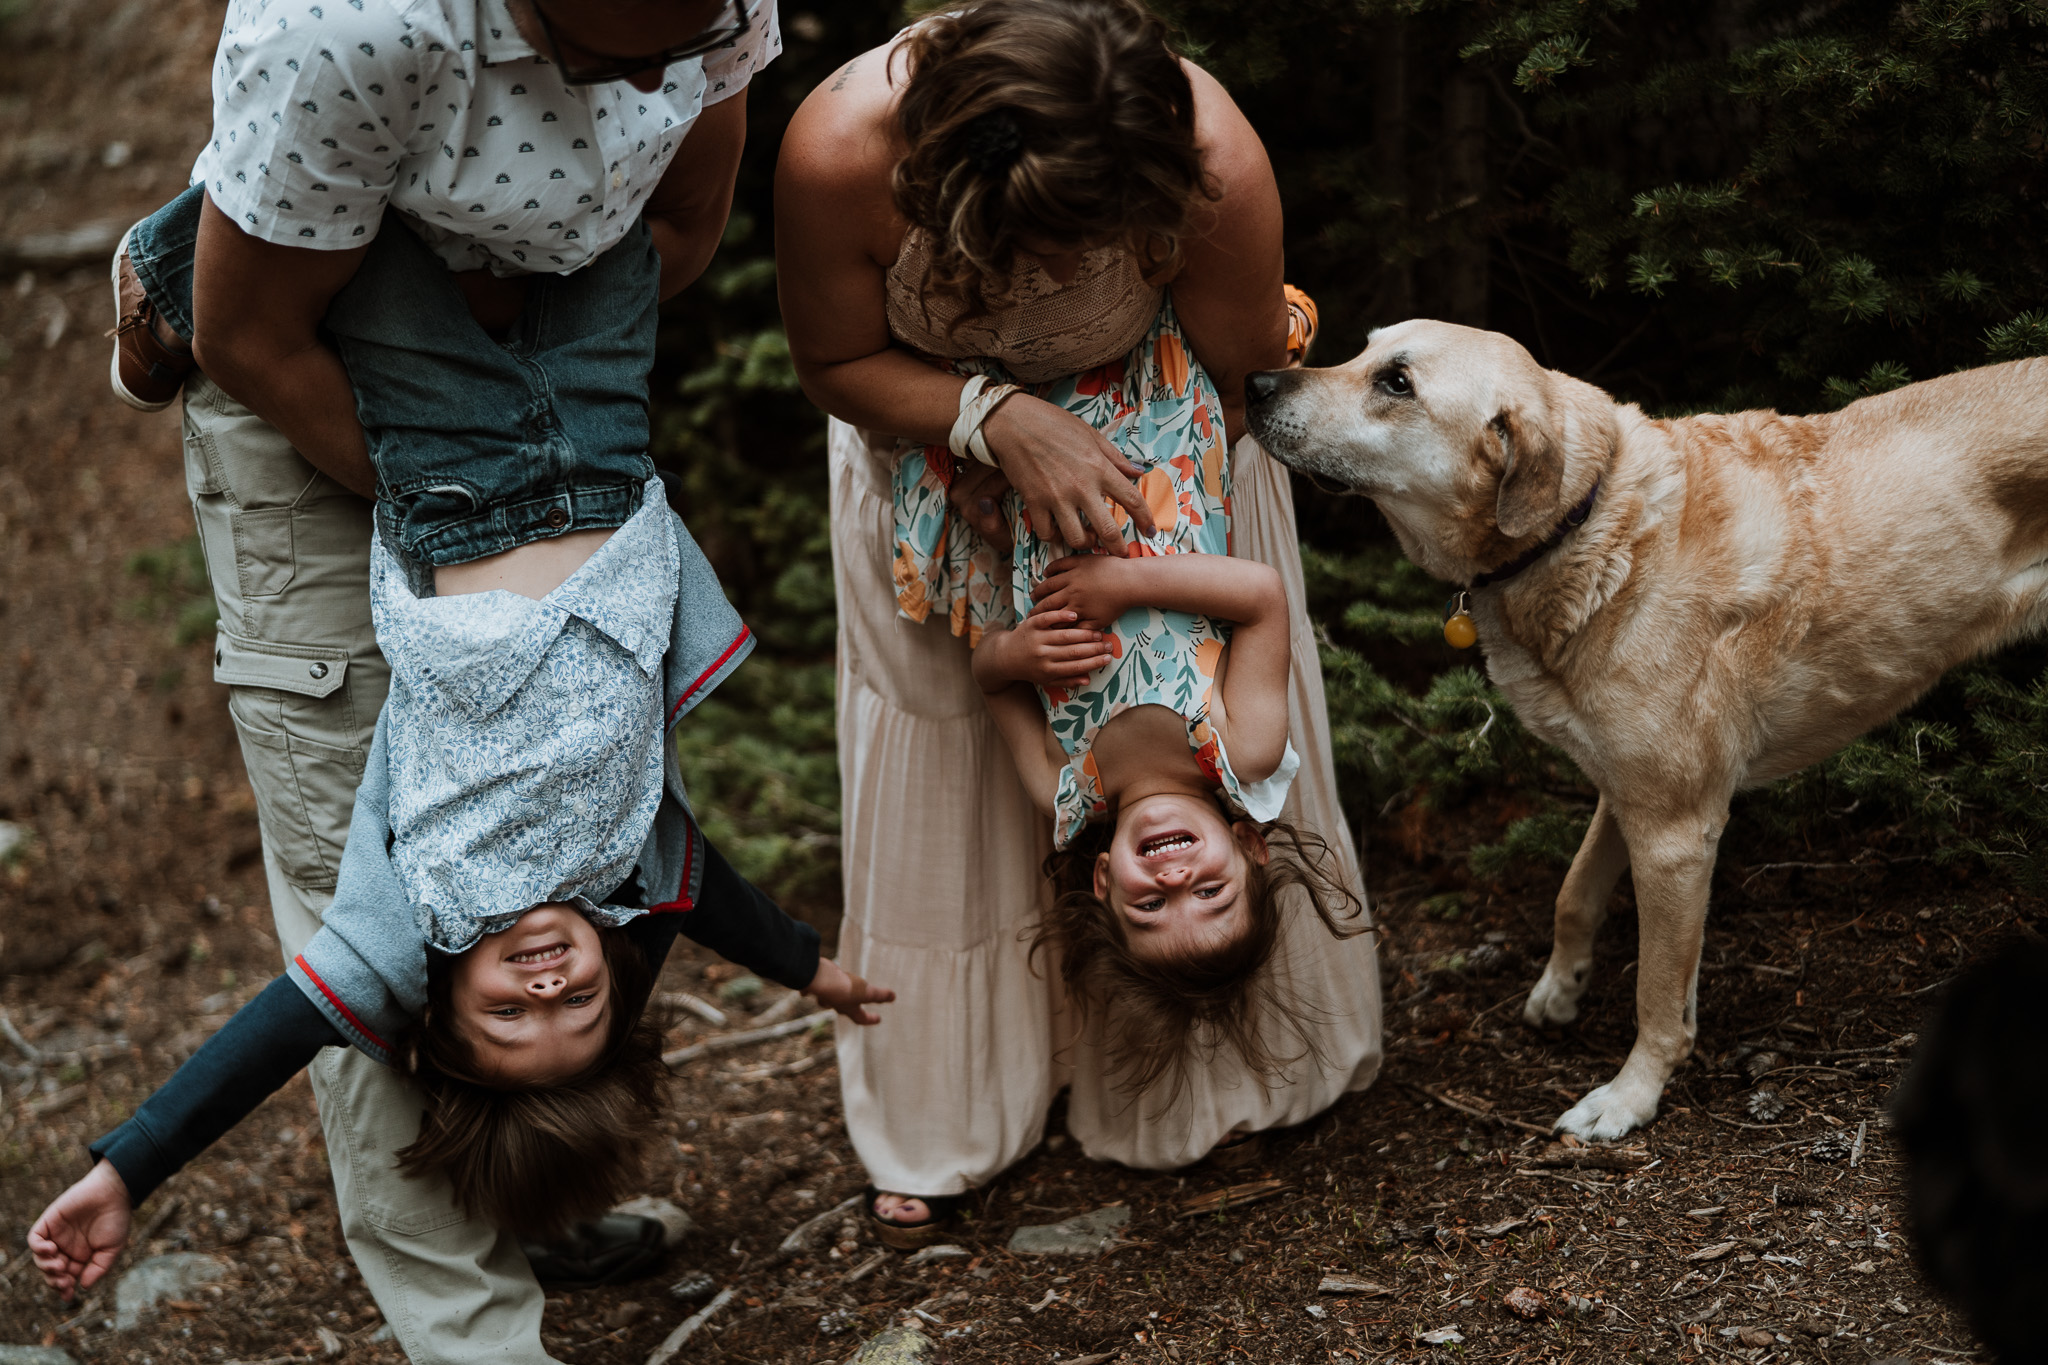 Family Photo Sessions in Colorado by Basecamp Visual